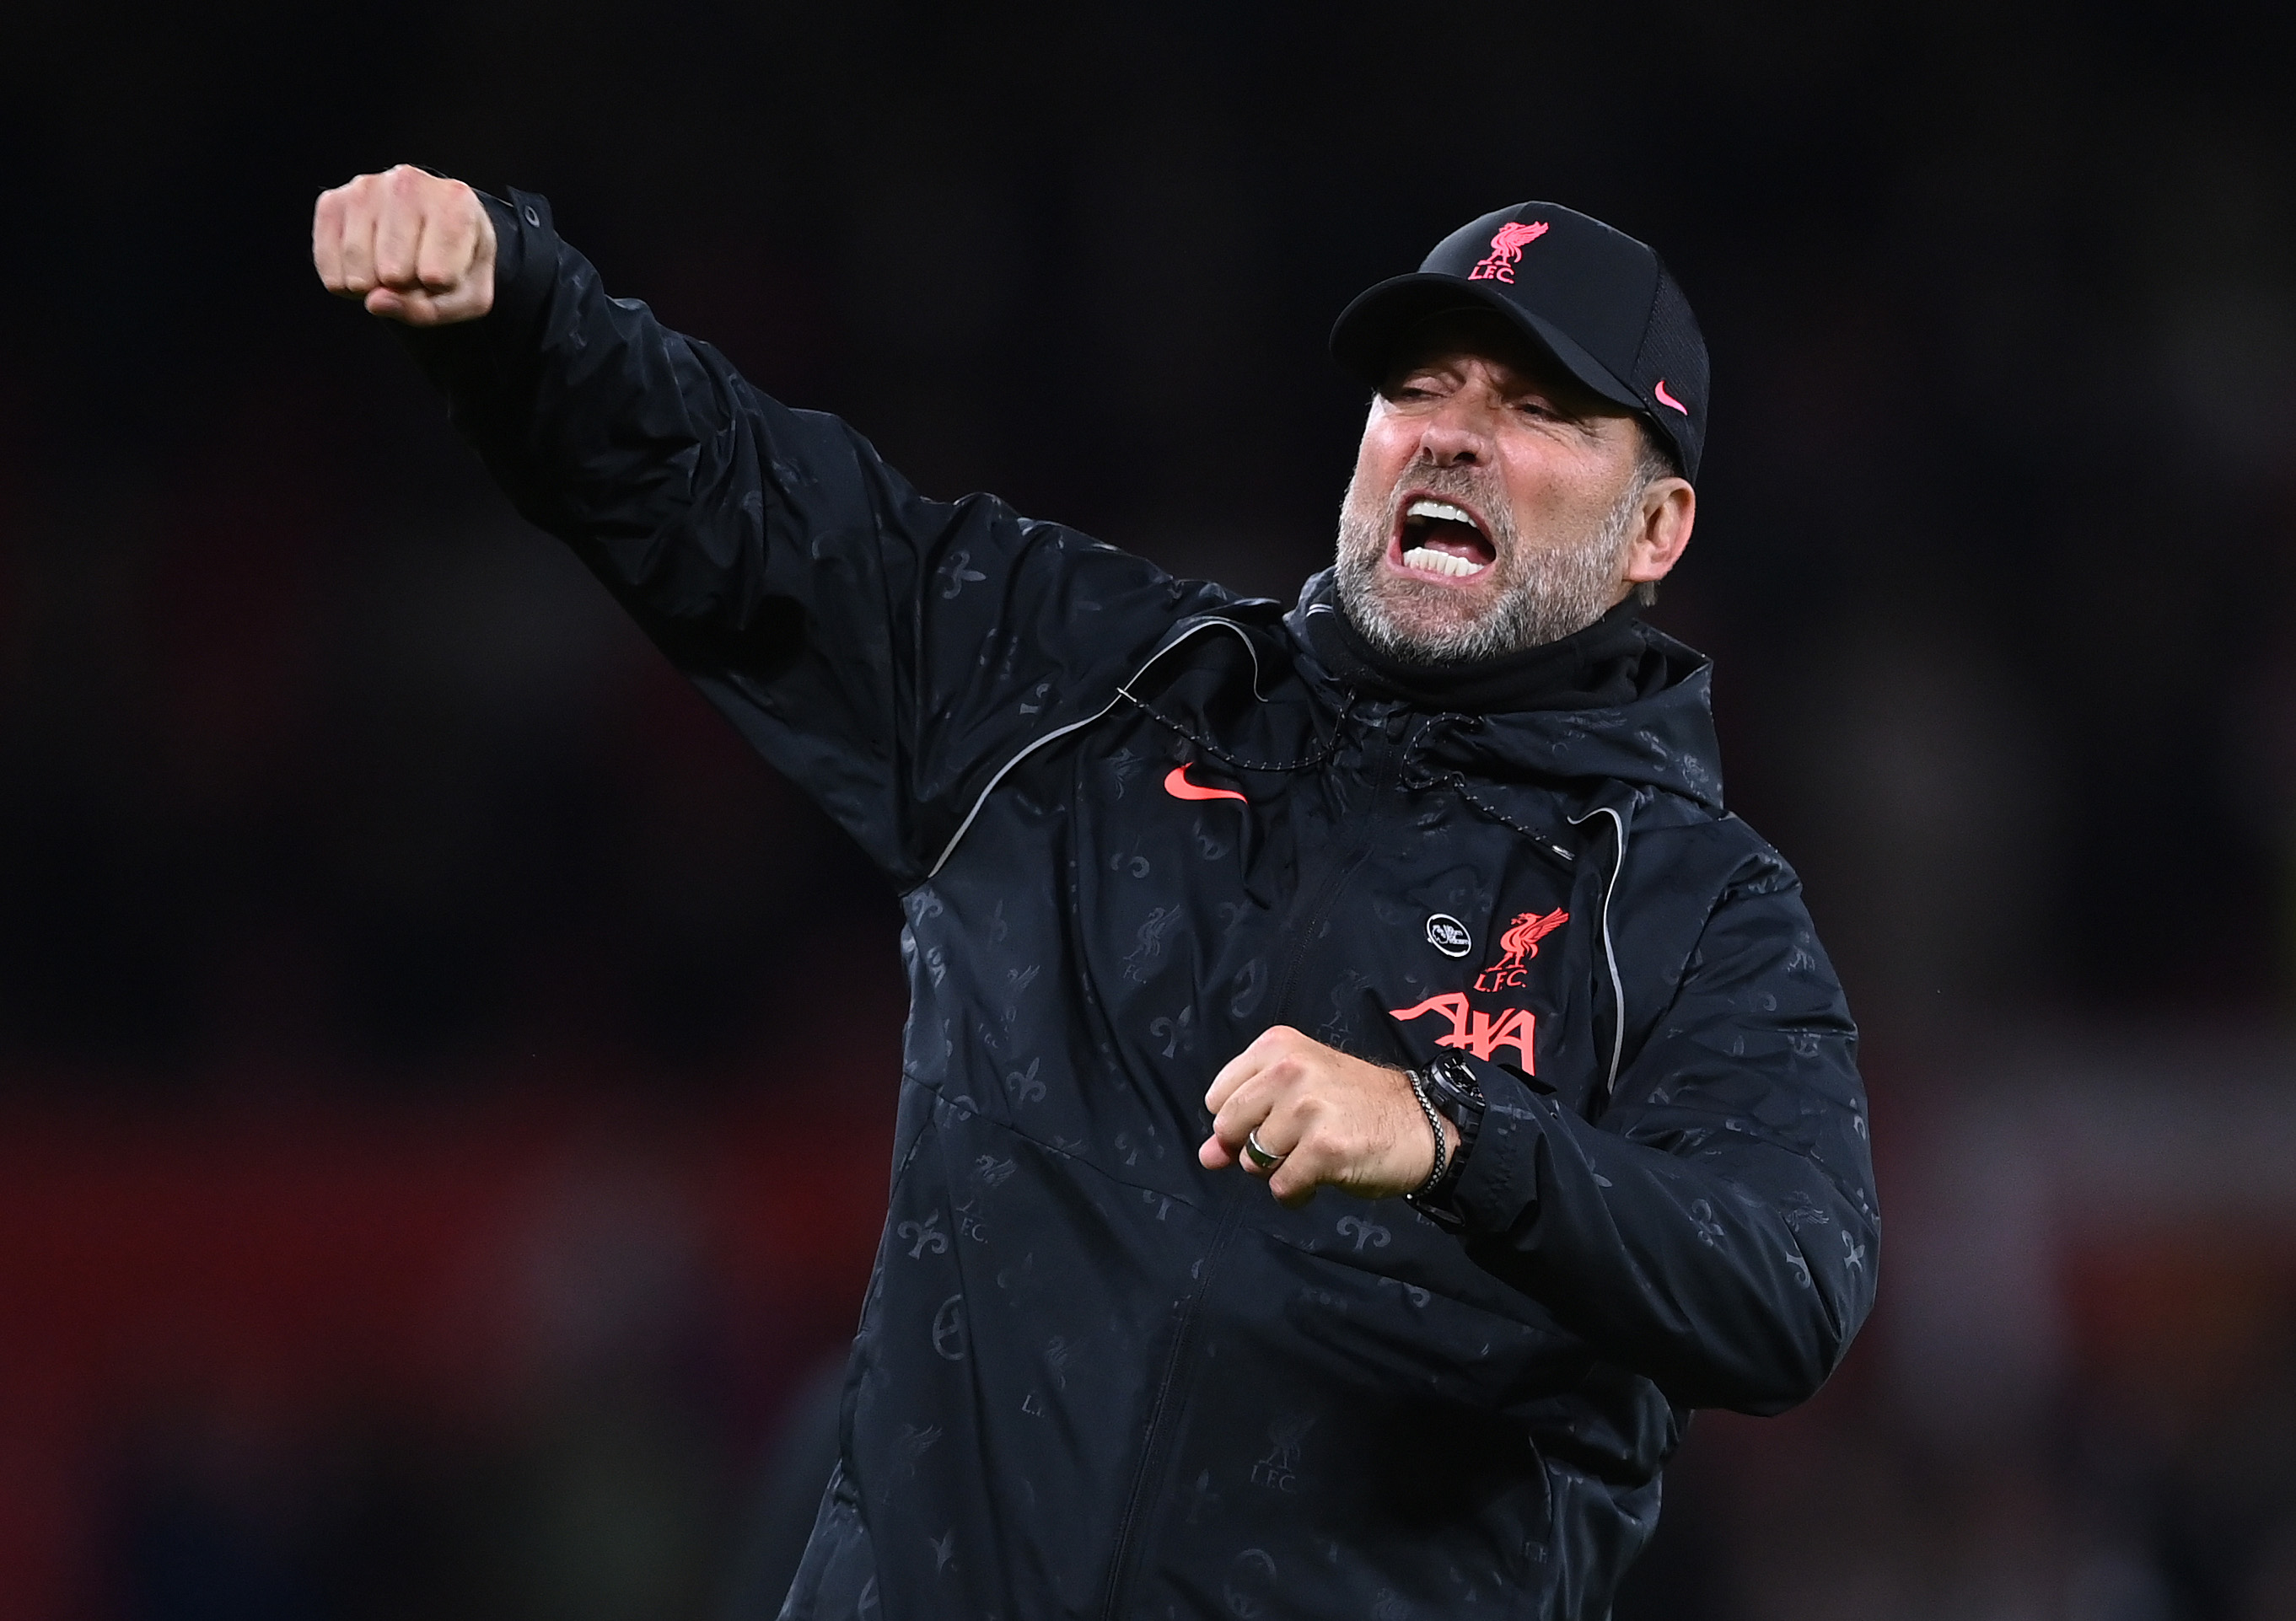 Liverpool manager Jurgen Klopp celebrates after the Premier League match between Manchester United and Liverpool at Old Trafford on October 24, 2021 in Manchester, England.